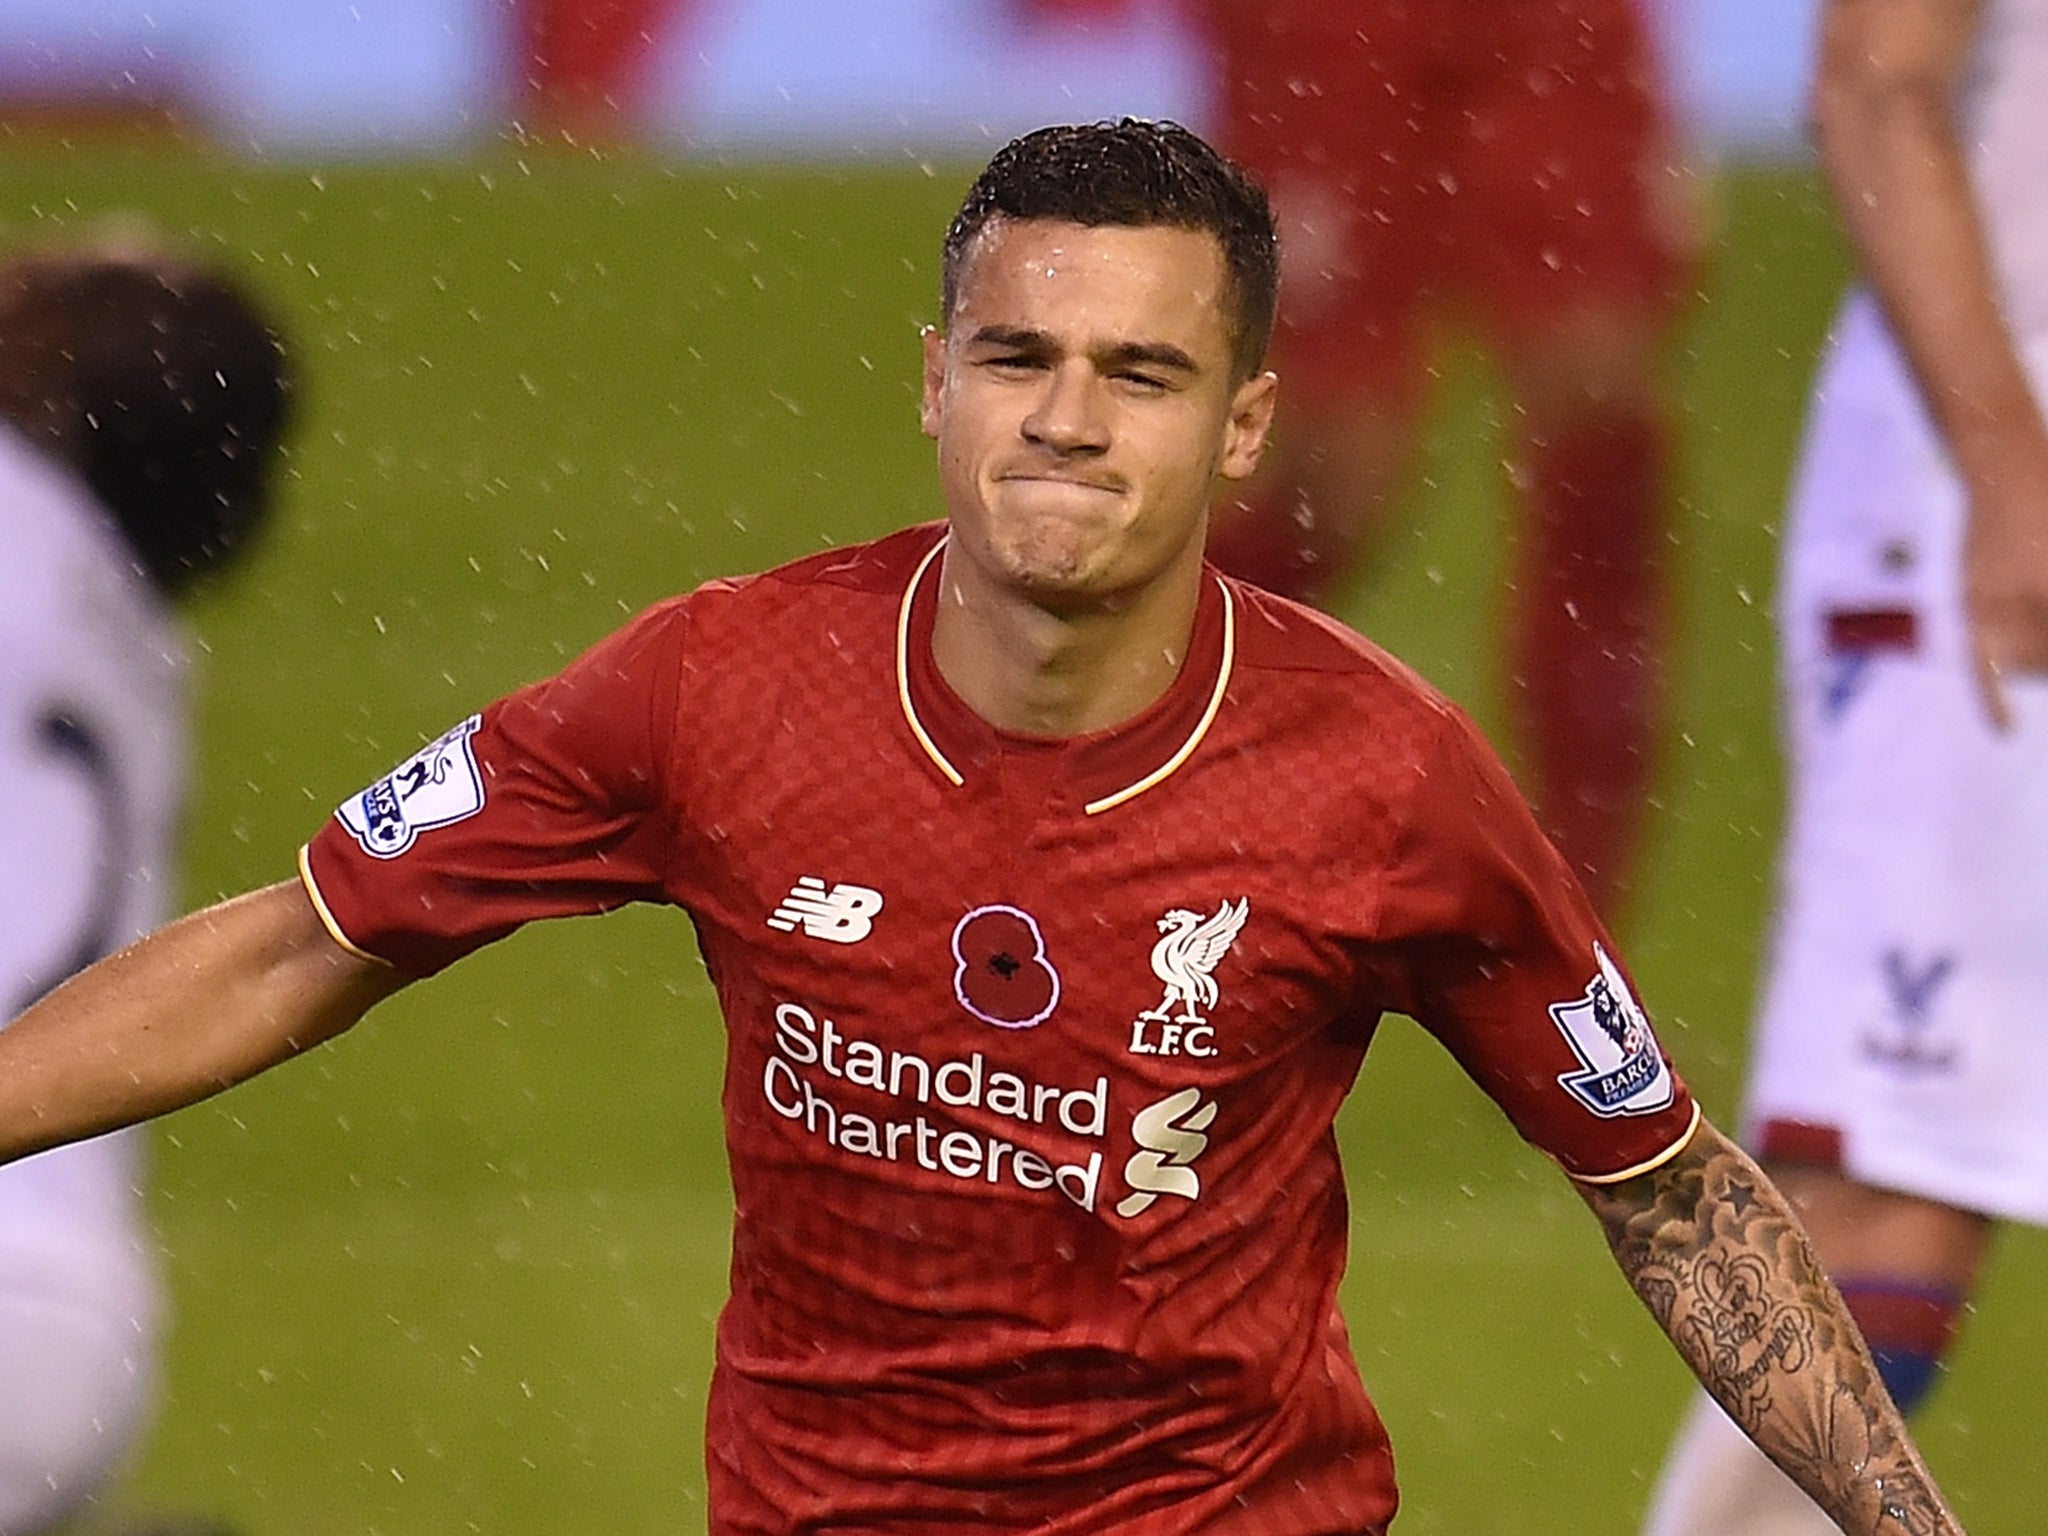 Liverpool playmaker Philippe Coutinho